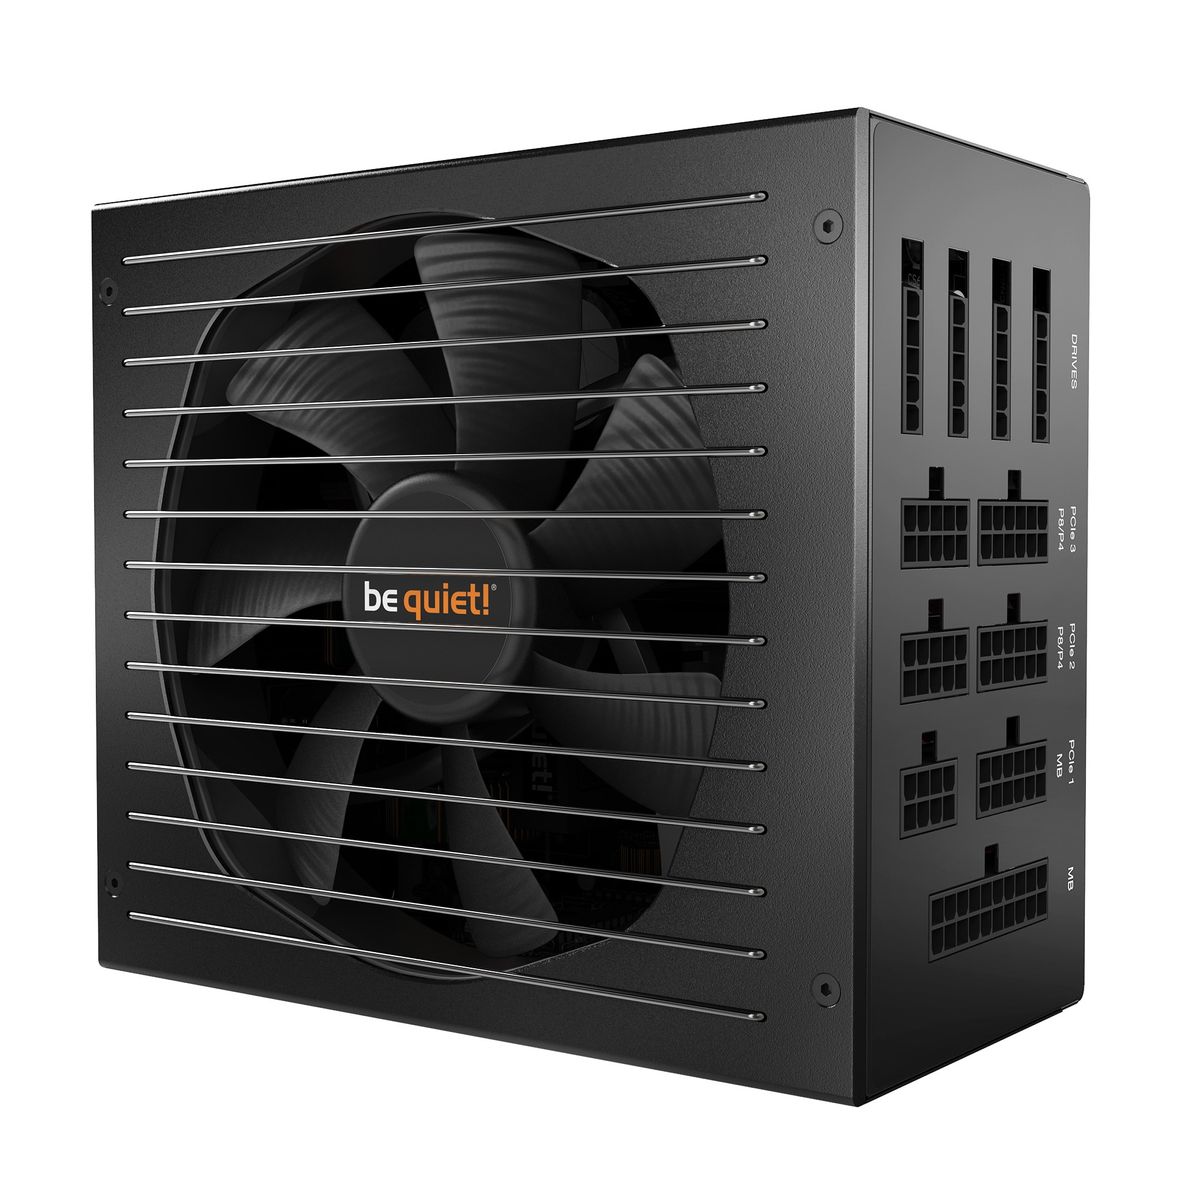 be quiet! STRAIGHT POWER 11 PC power supply ATX 750W with cable management 80Plus Gold BN283 black